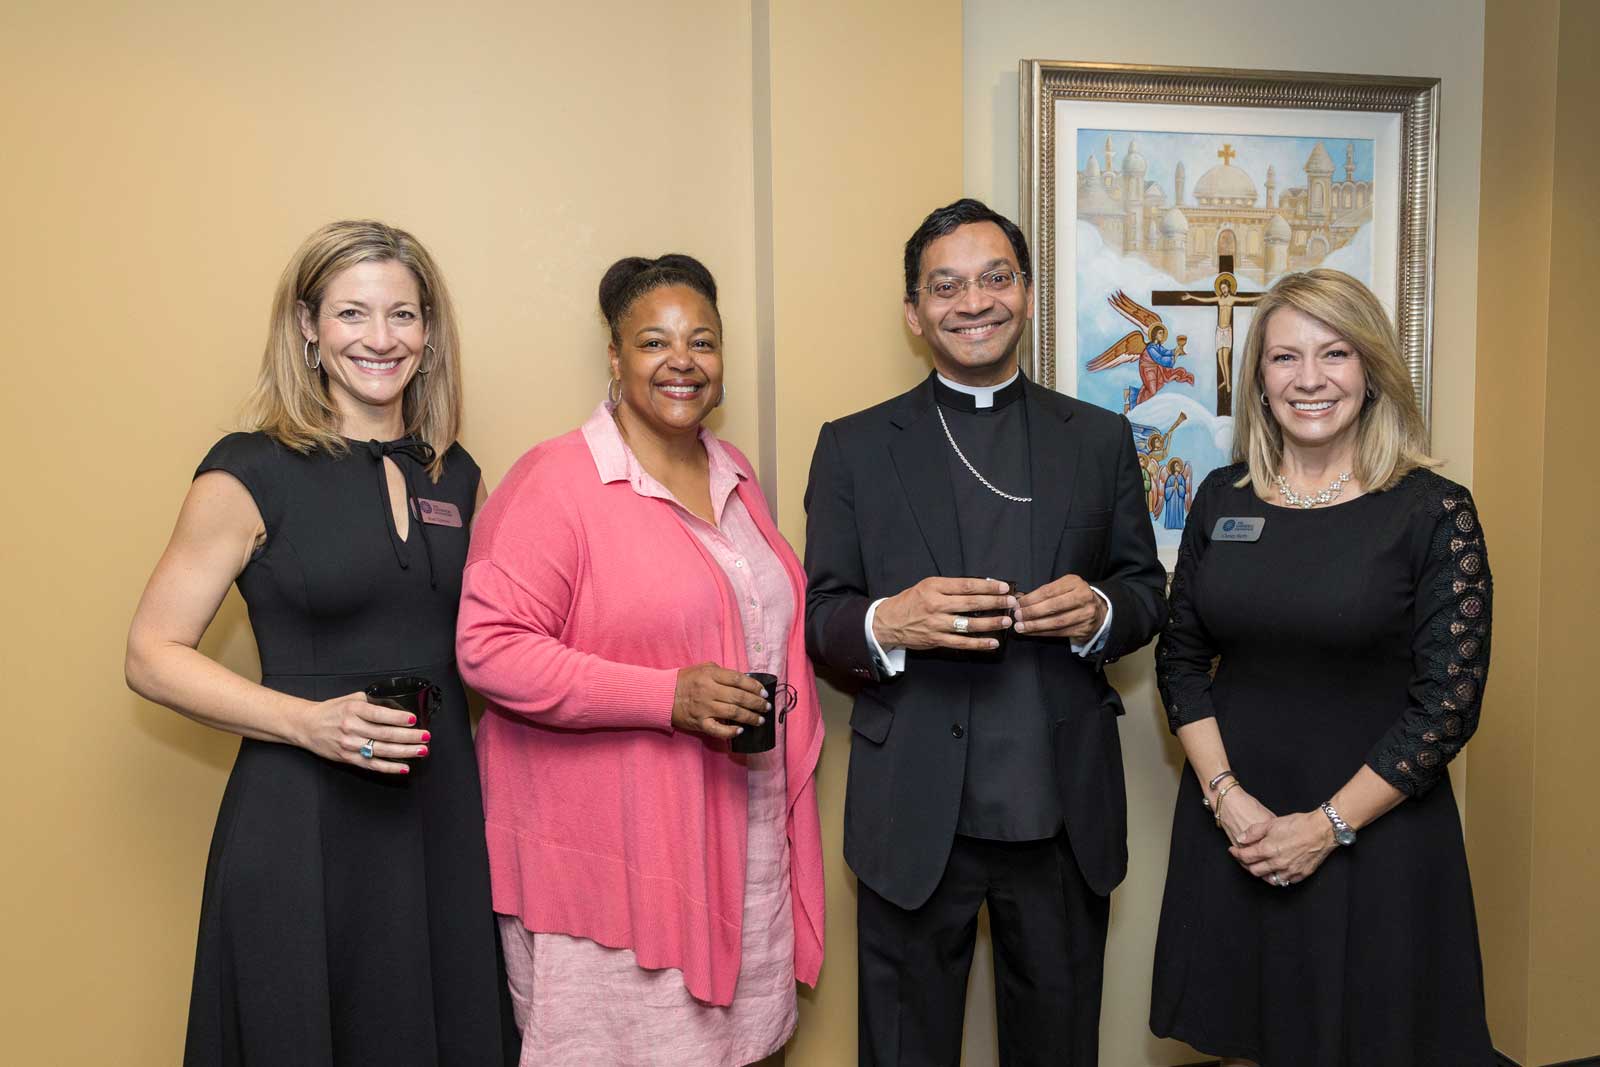 Four of The Catholic Foundation team members posing for a photo.